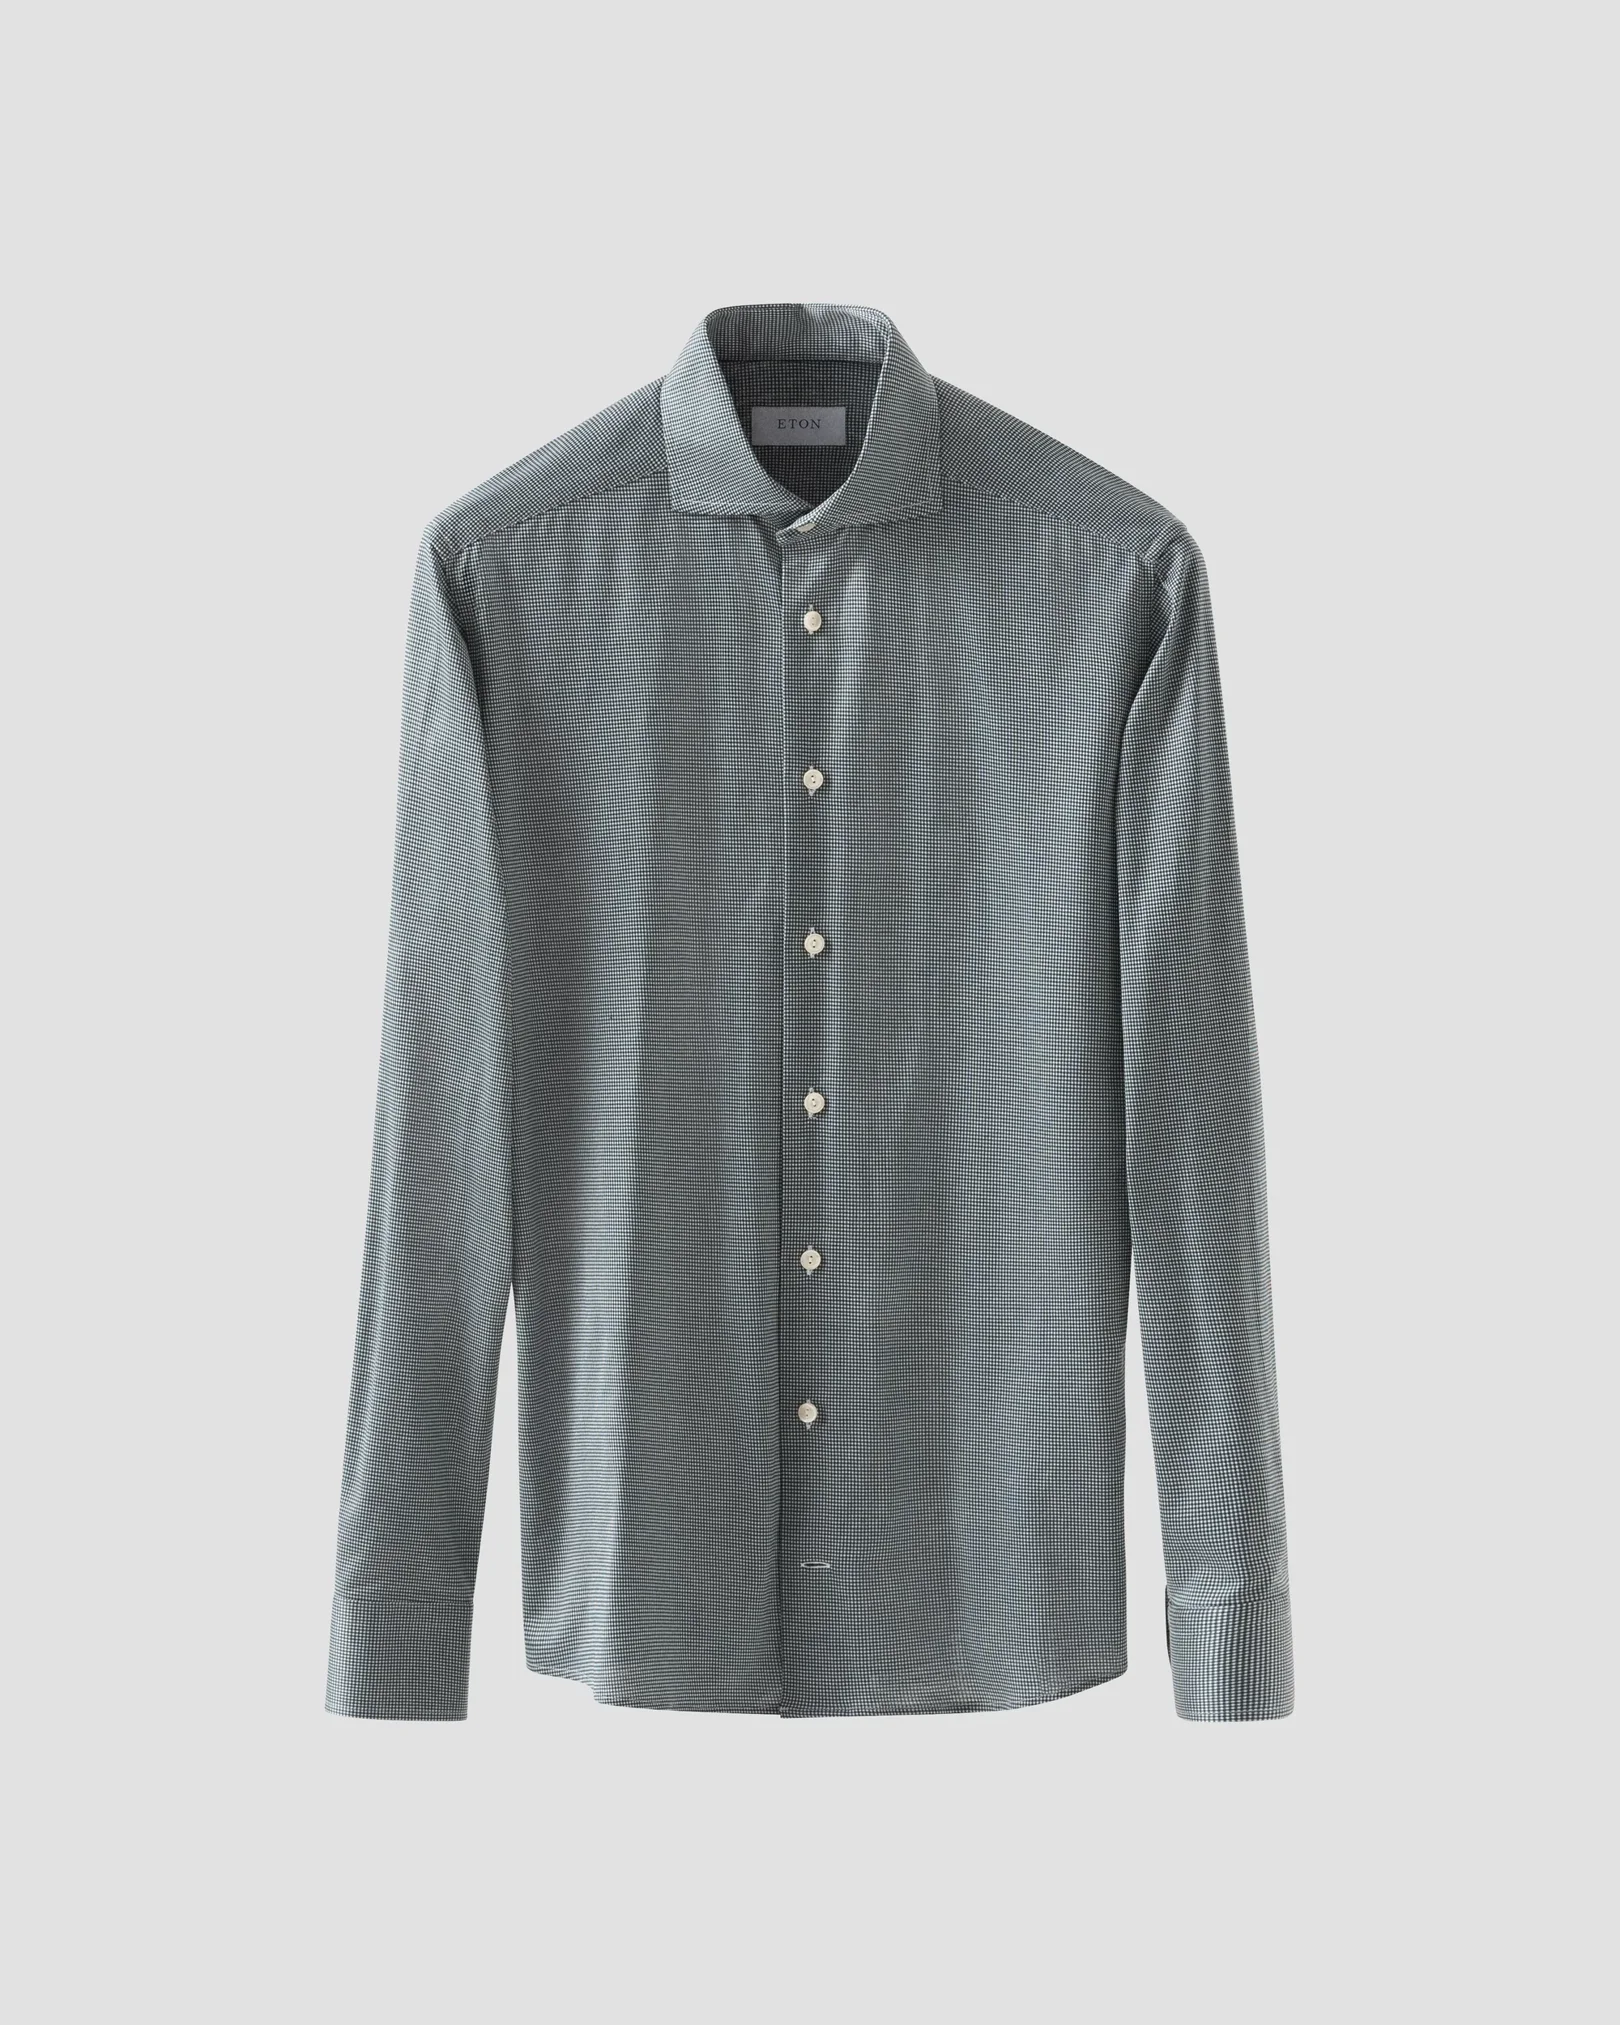 Eton - Green Checked Knitted Shirt